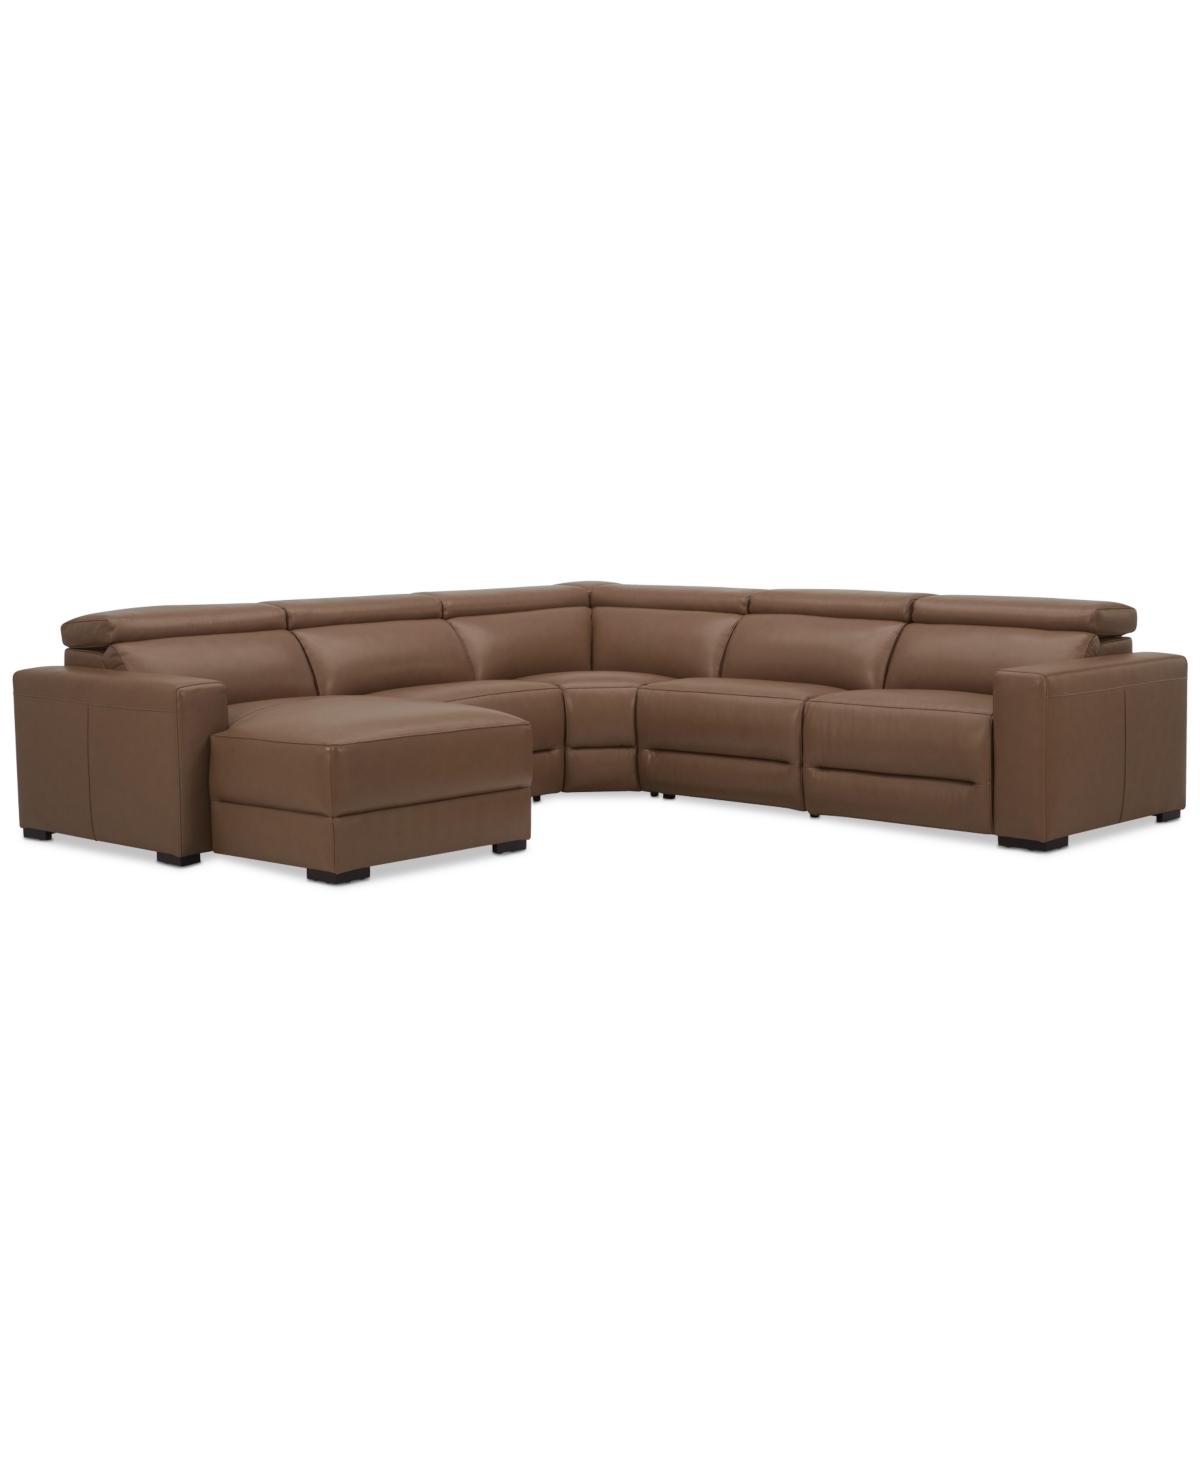 Macy's Nevio 124" 5-pc. Leather Sectional With 2 Power Recliners, Headrests And Chaise, Created For  In Butternut